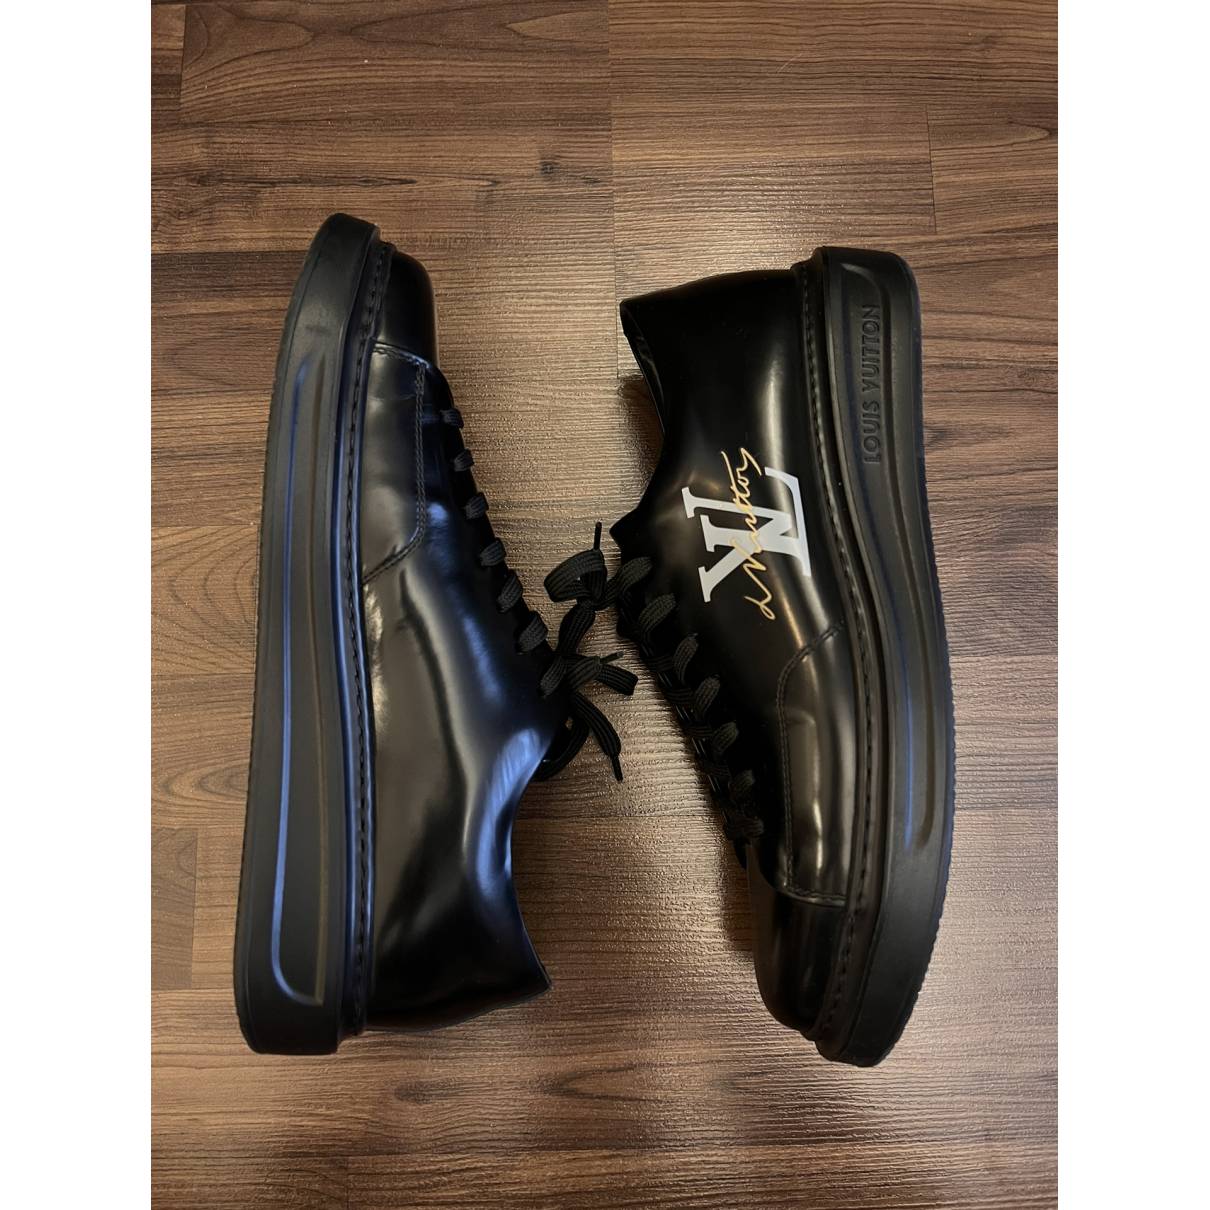 Louis Vuitton - Authenticated Beverly Hills Trainer - Leather Black Plain For Man, Very Good condition